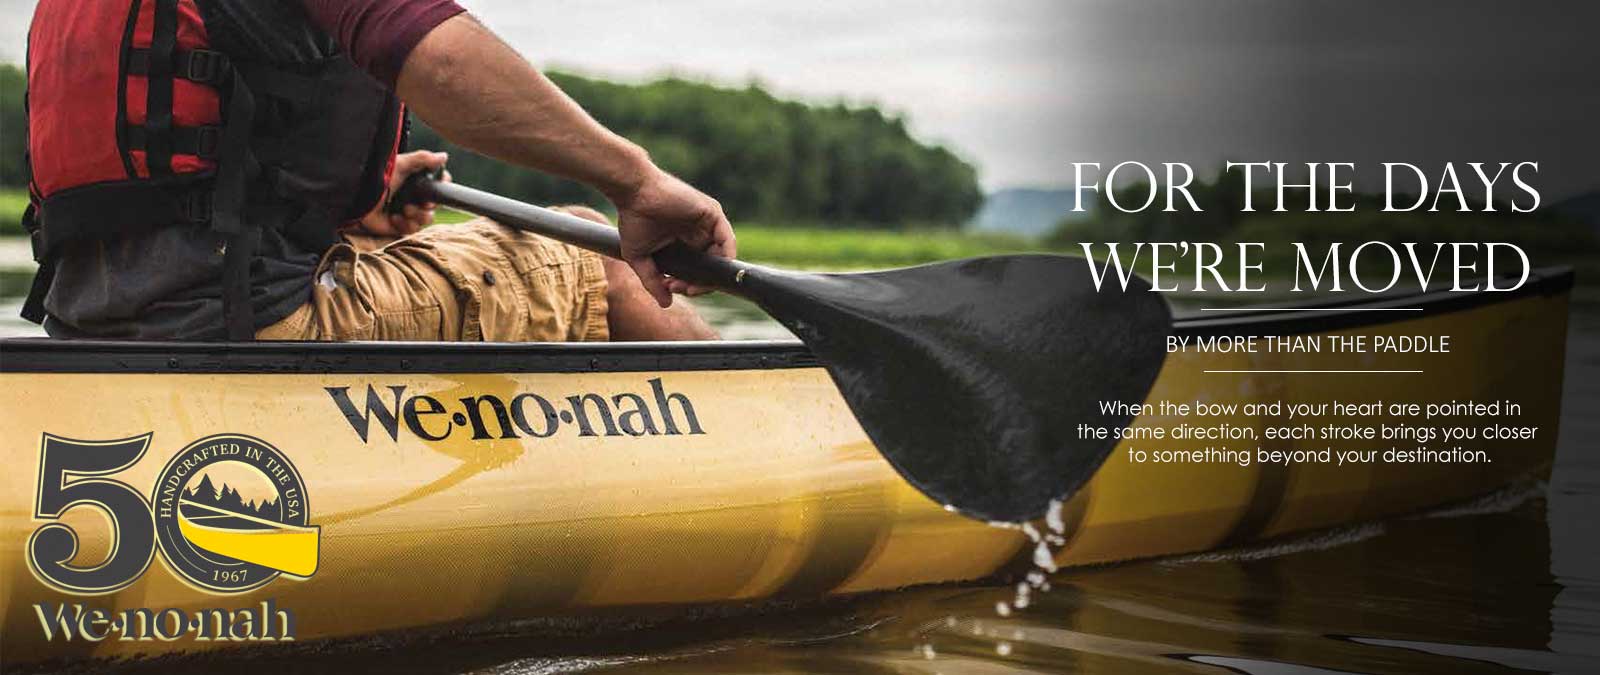 Wenonah Canoe manufactures canoes and paddling accessories for paddle 